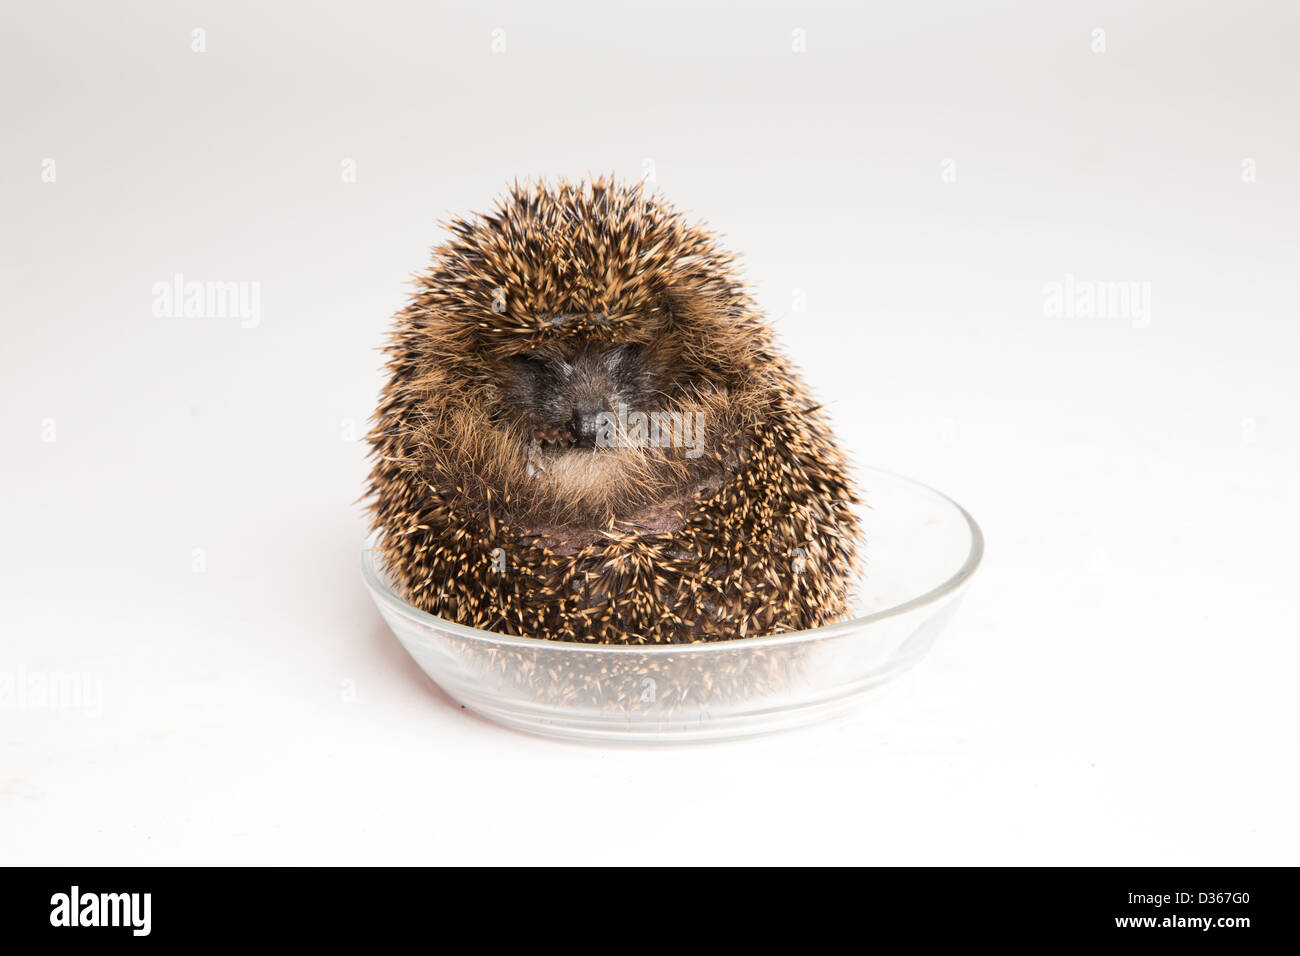 A hedgehog rolls itself up for protection Stock Photo - Alamy